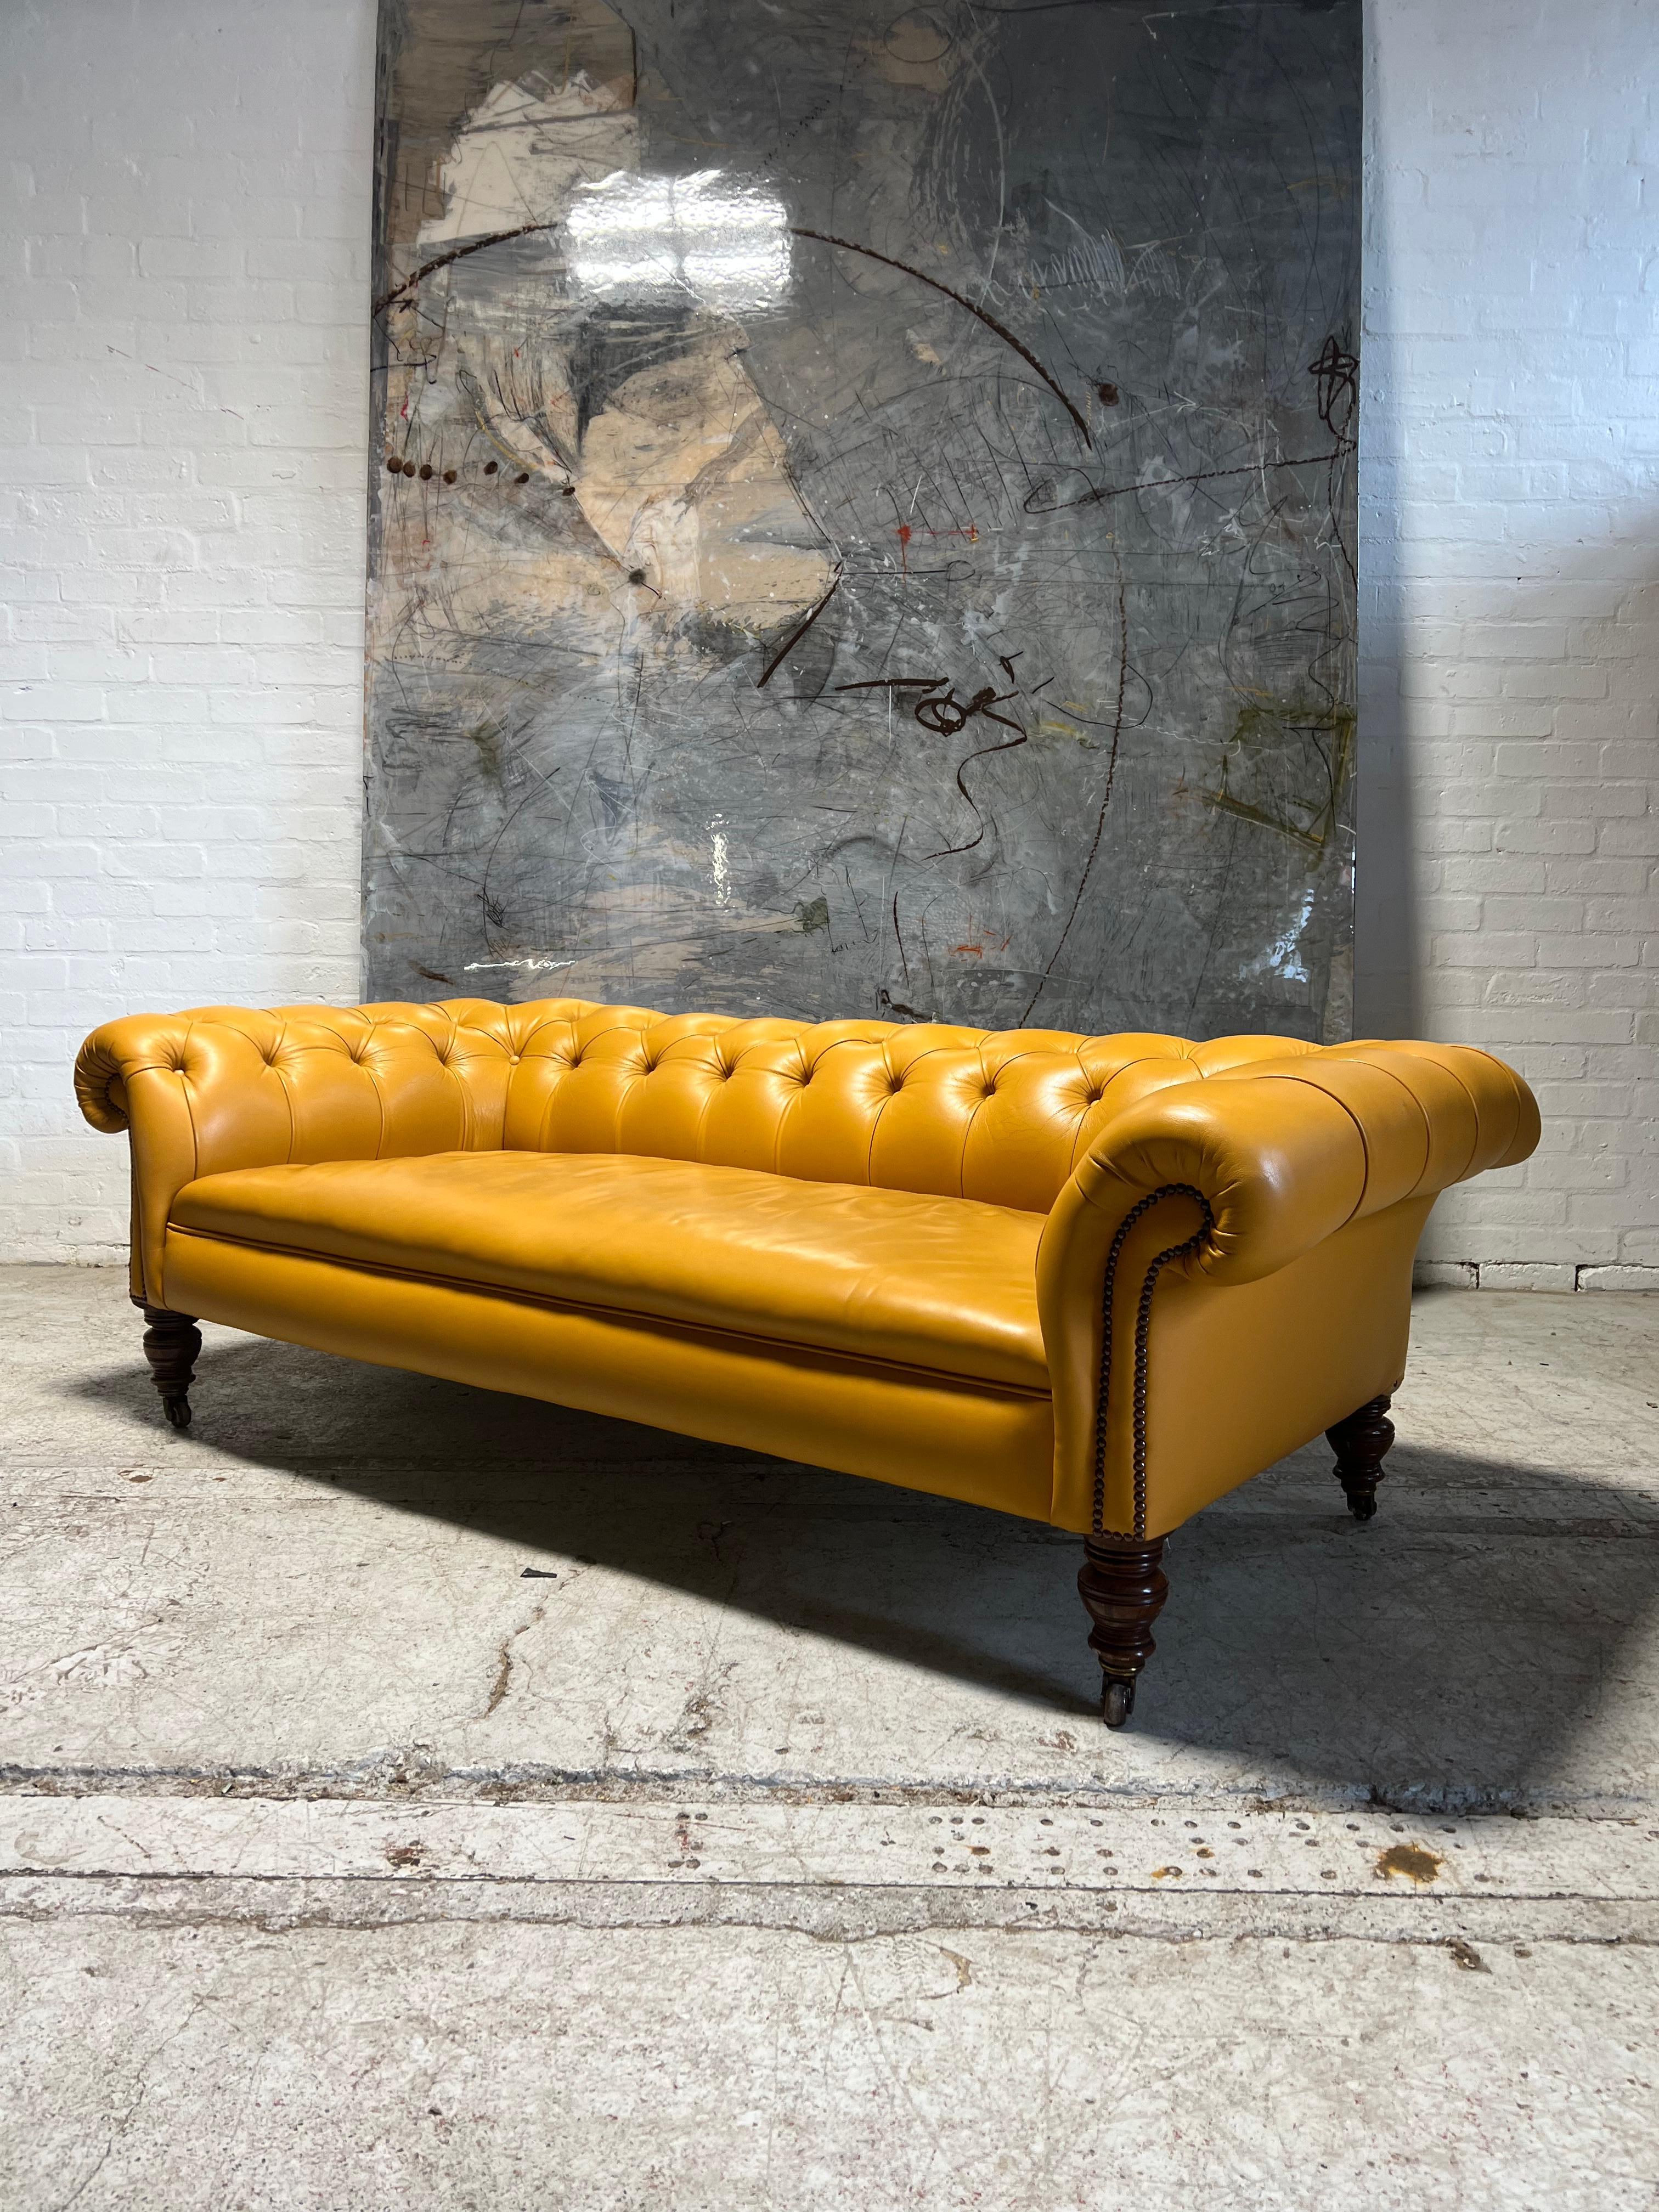 Antique 19thC Chesterfield Sofa in Stunning Sunflower Yellow Leather 2